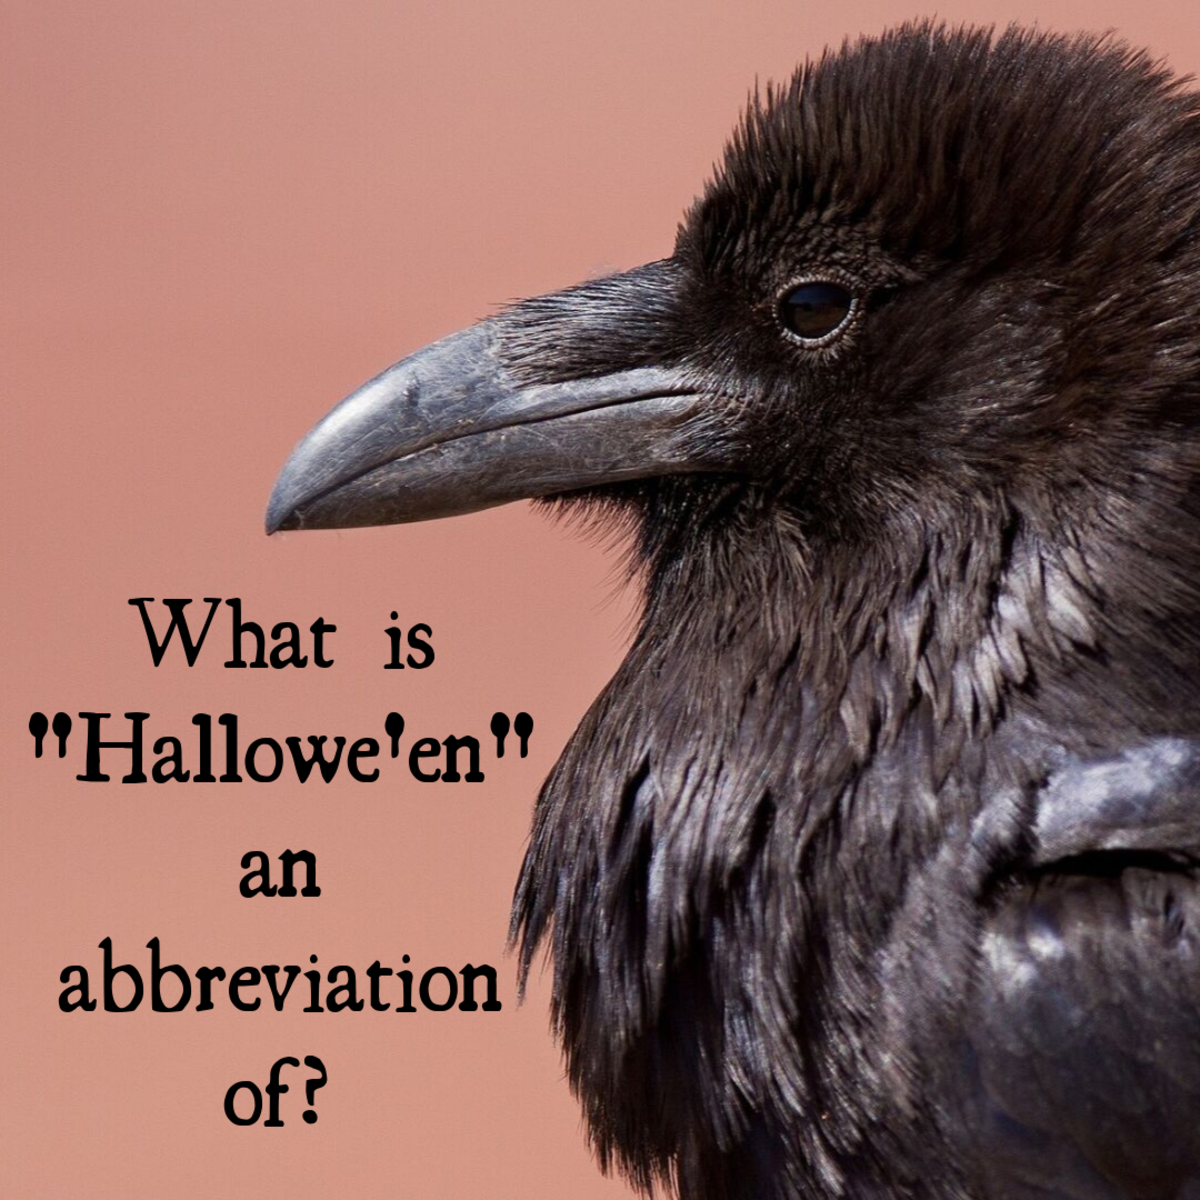 What is "Hallowe'en" an abbreviation of? Answer: "All Hallow's Eve".